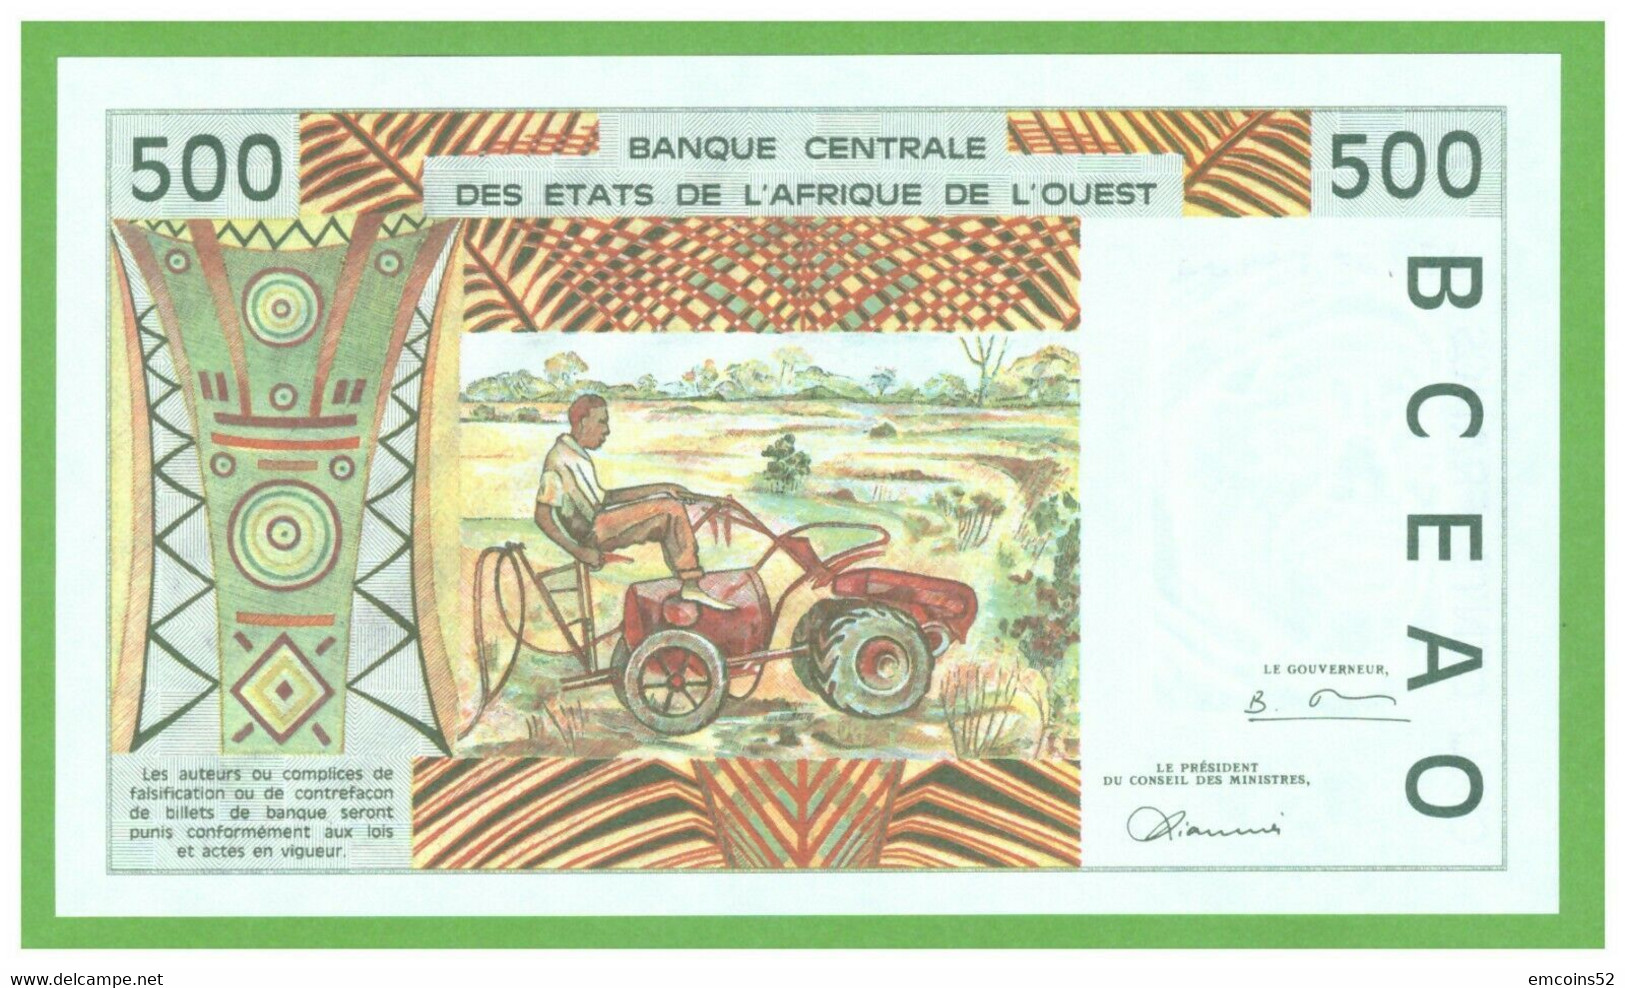 IVORY COAST W.A.S. 500 FRANCS 1997  P-110Ag UNC - West African States